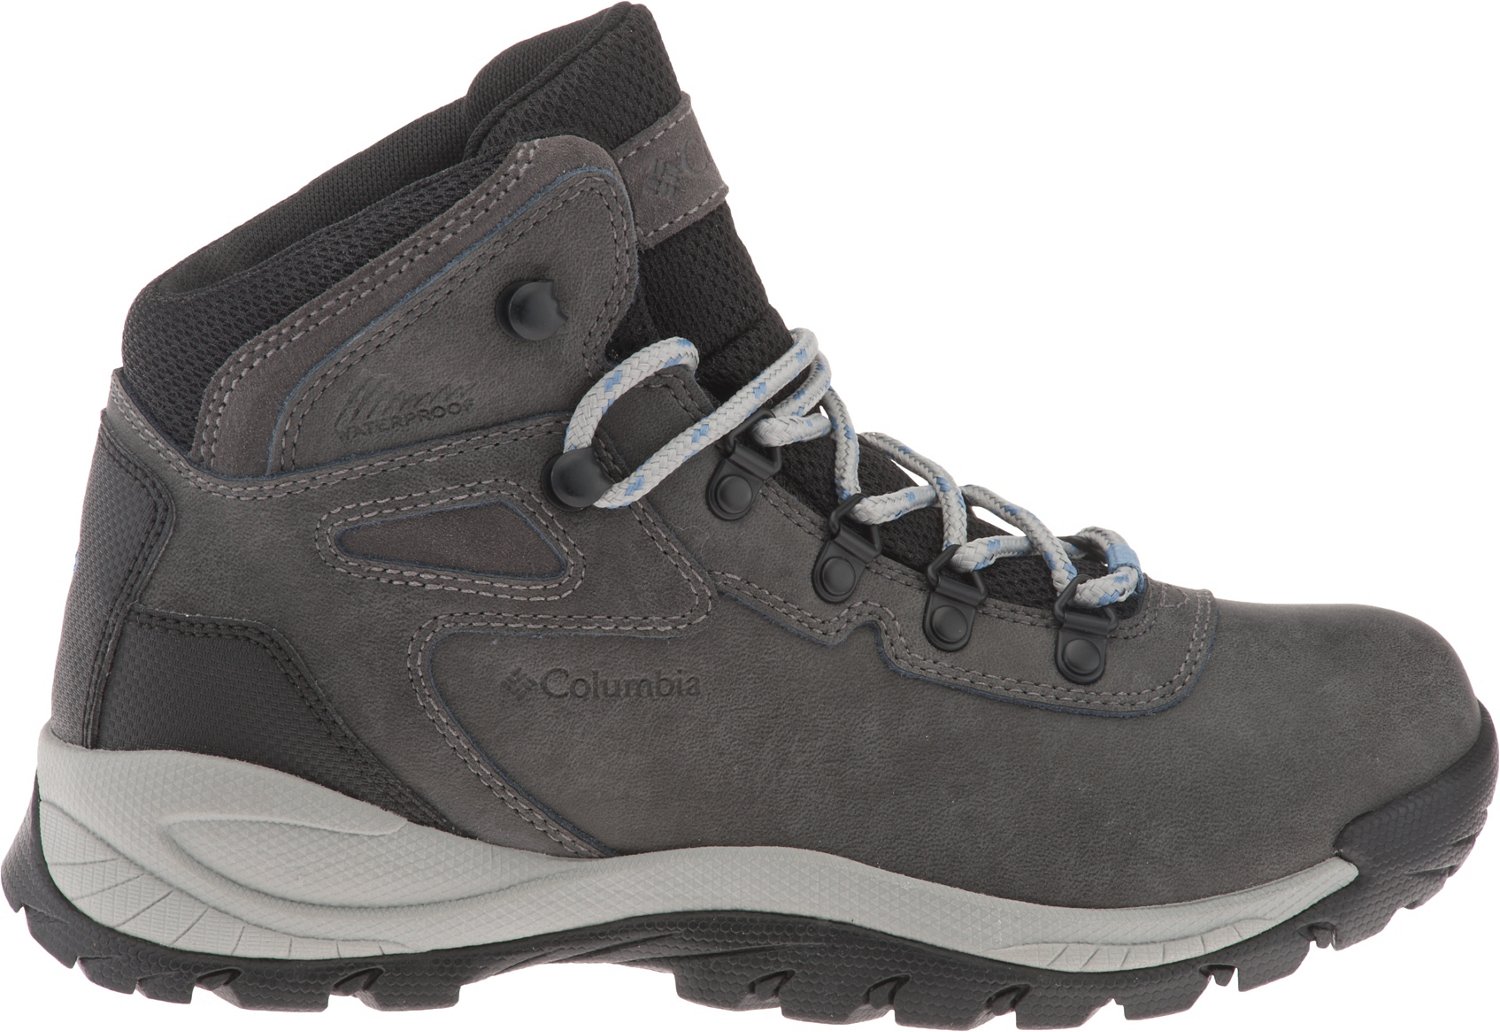 Hiking Boots For Women 